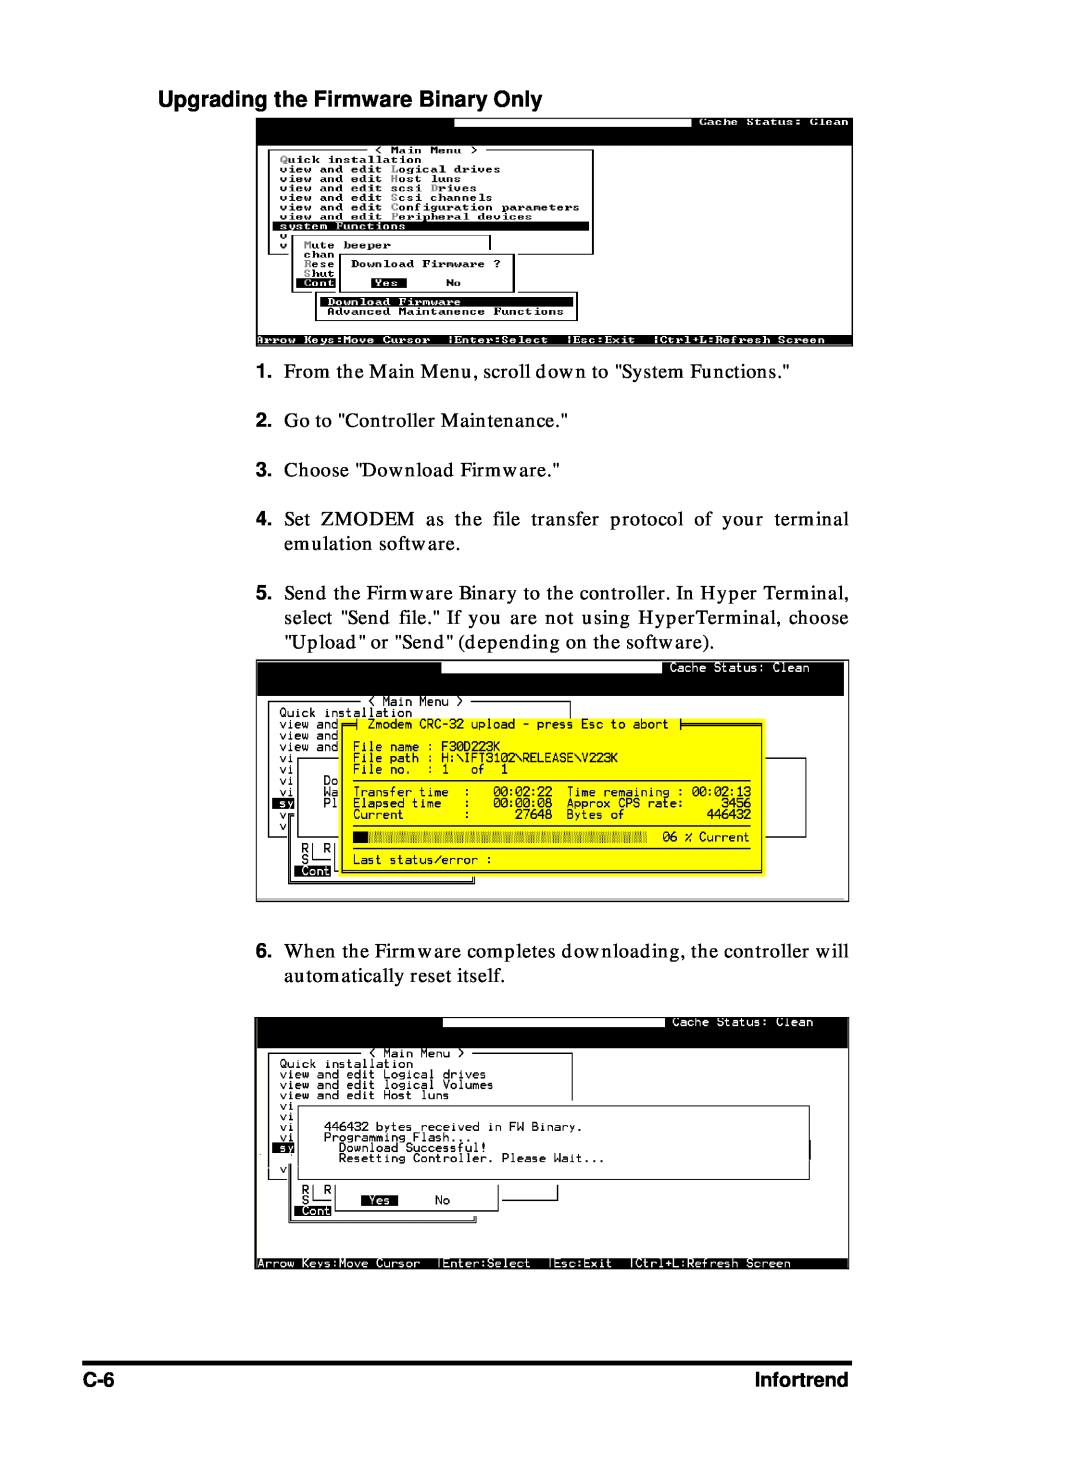 Compaq Infortrend manual Upgrading the Firmware Binary Only 